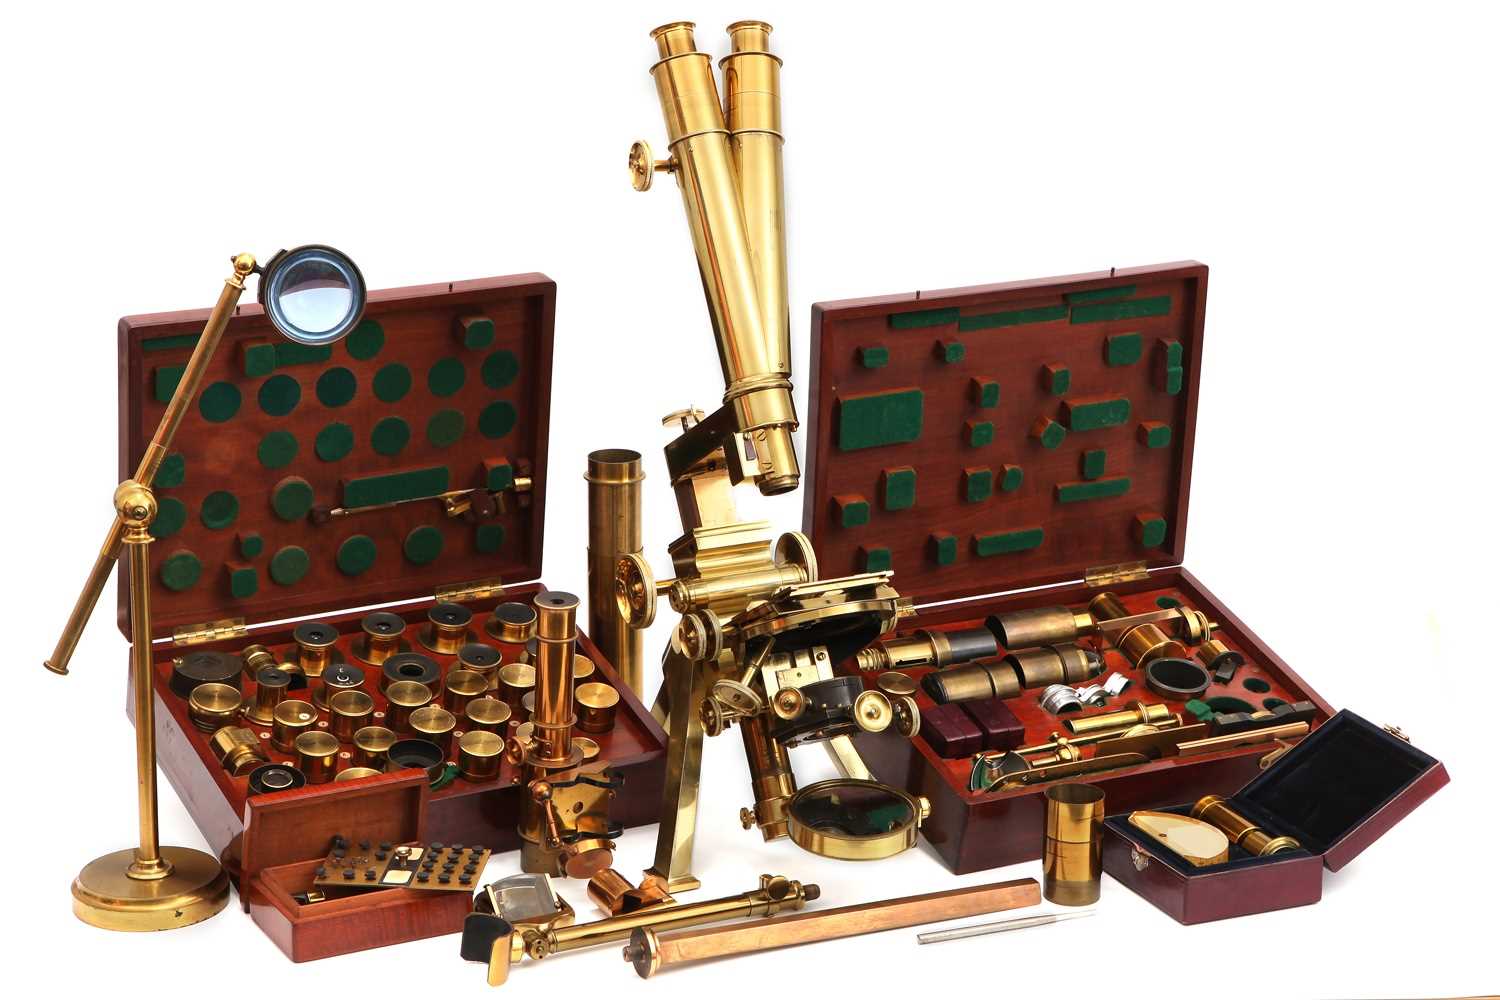 Lot 1 - An Exceptionally Fine Powell & Lealand "No. 1" Compound Monocular/Binocular Microscope Outfit